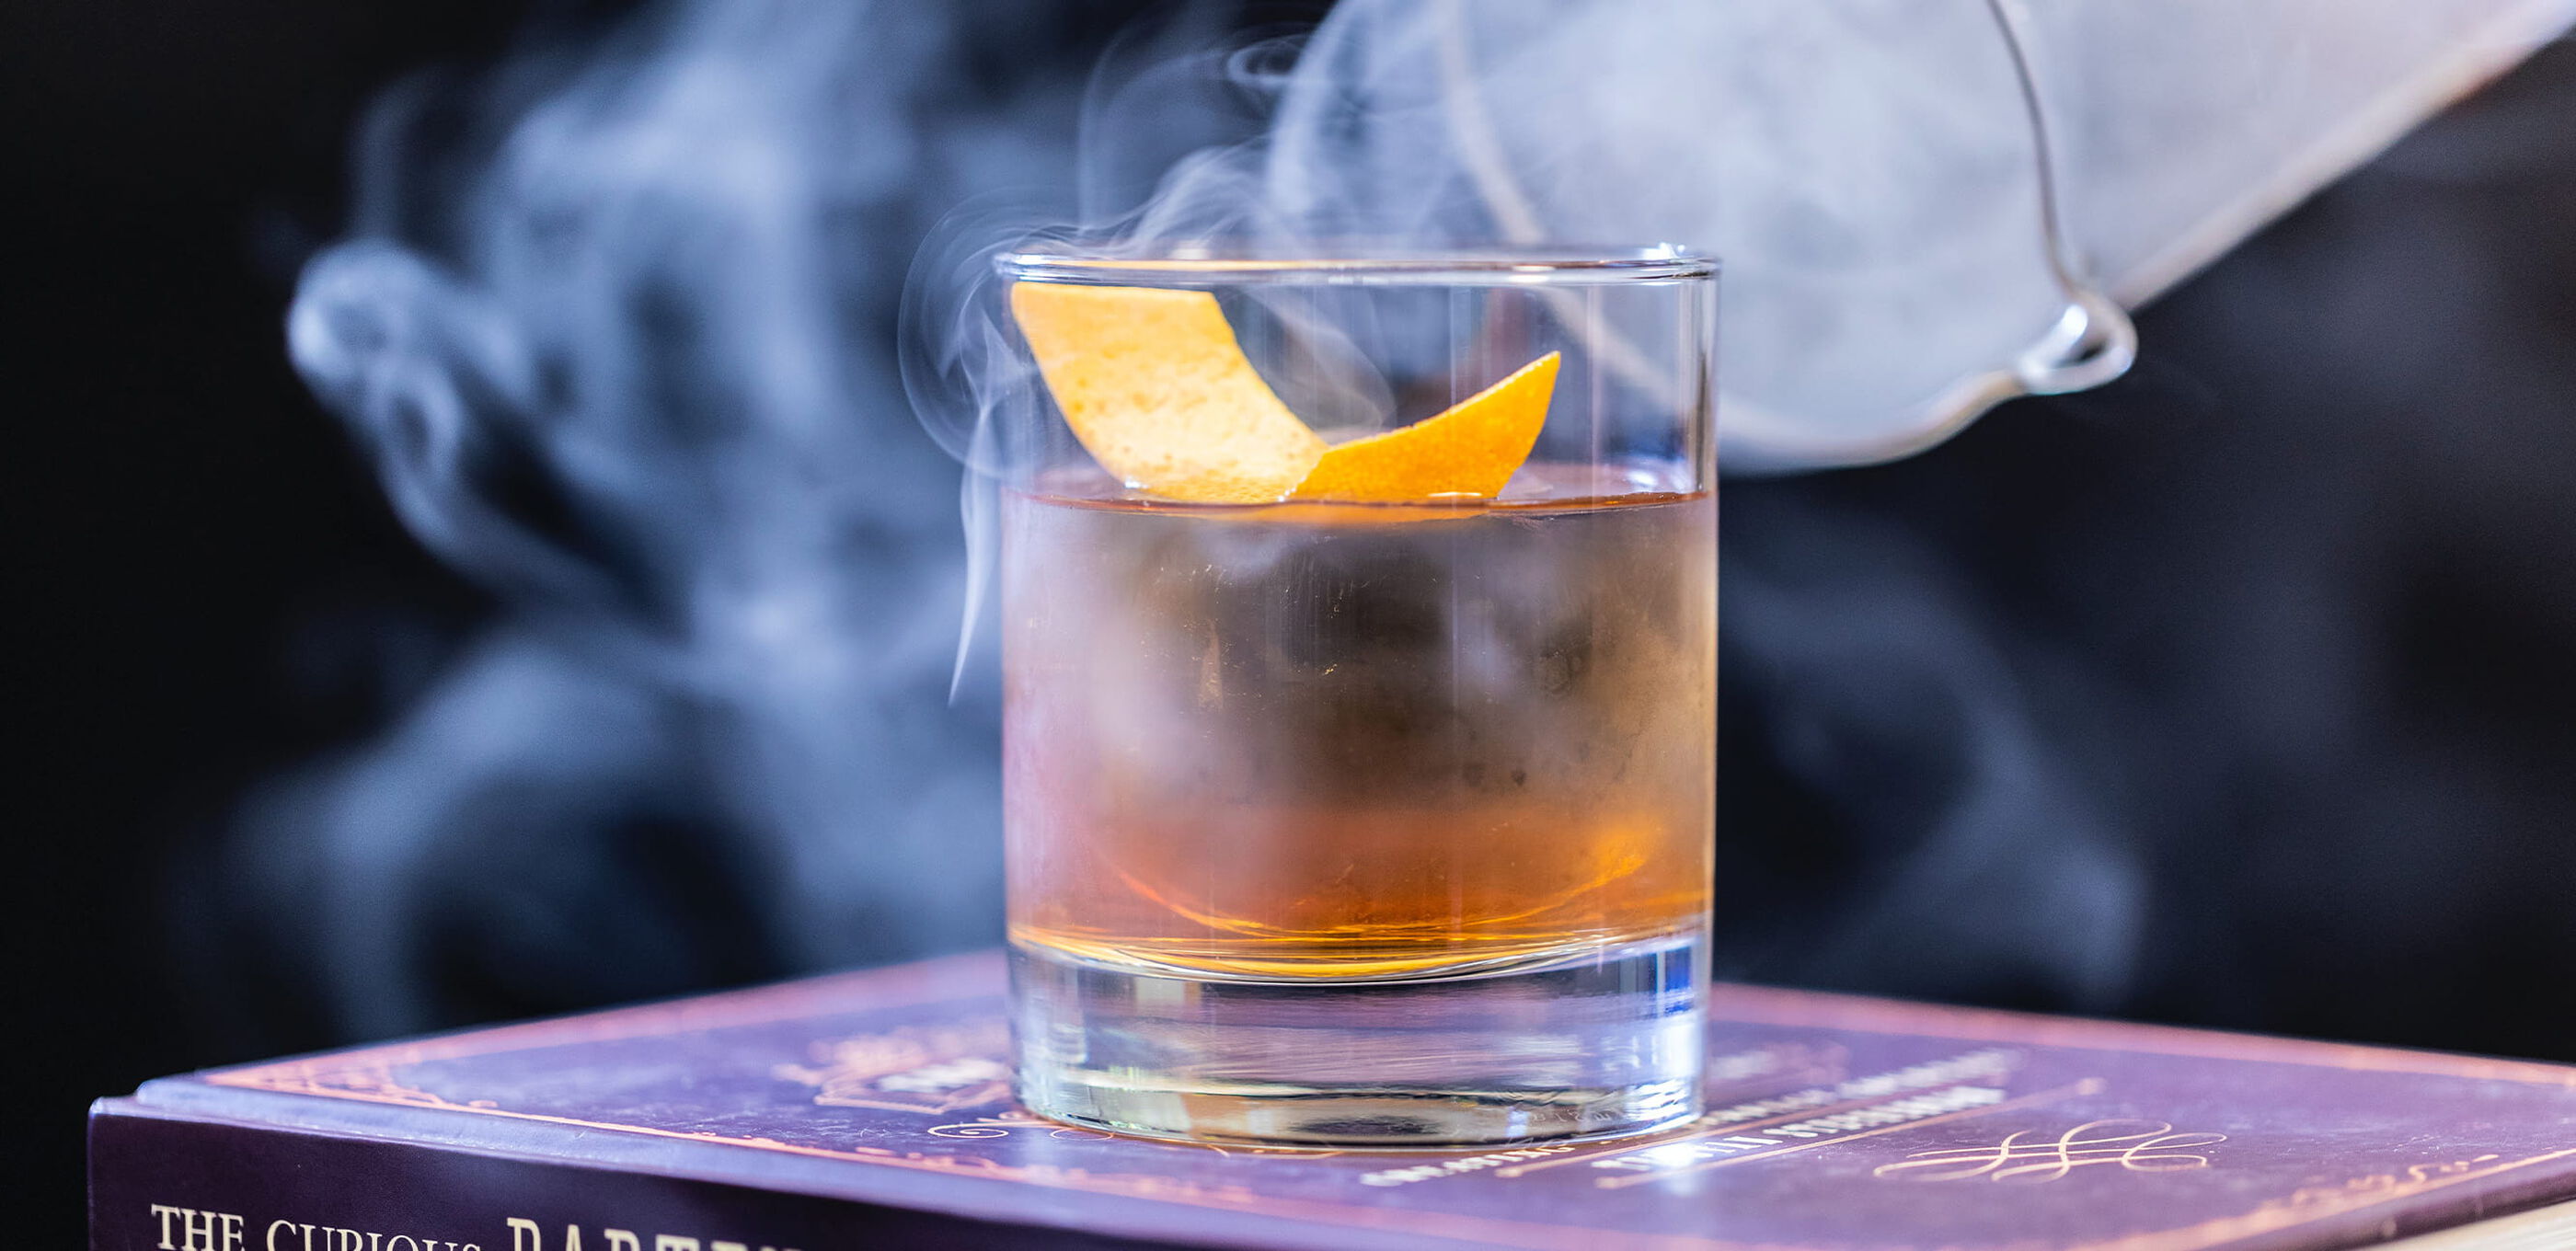 A smoking cloche is taken off an old fashioned cocktail, filling the air with aromatic smoke